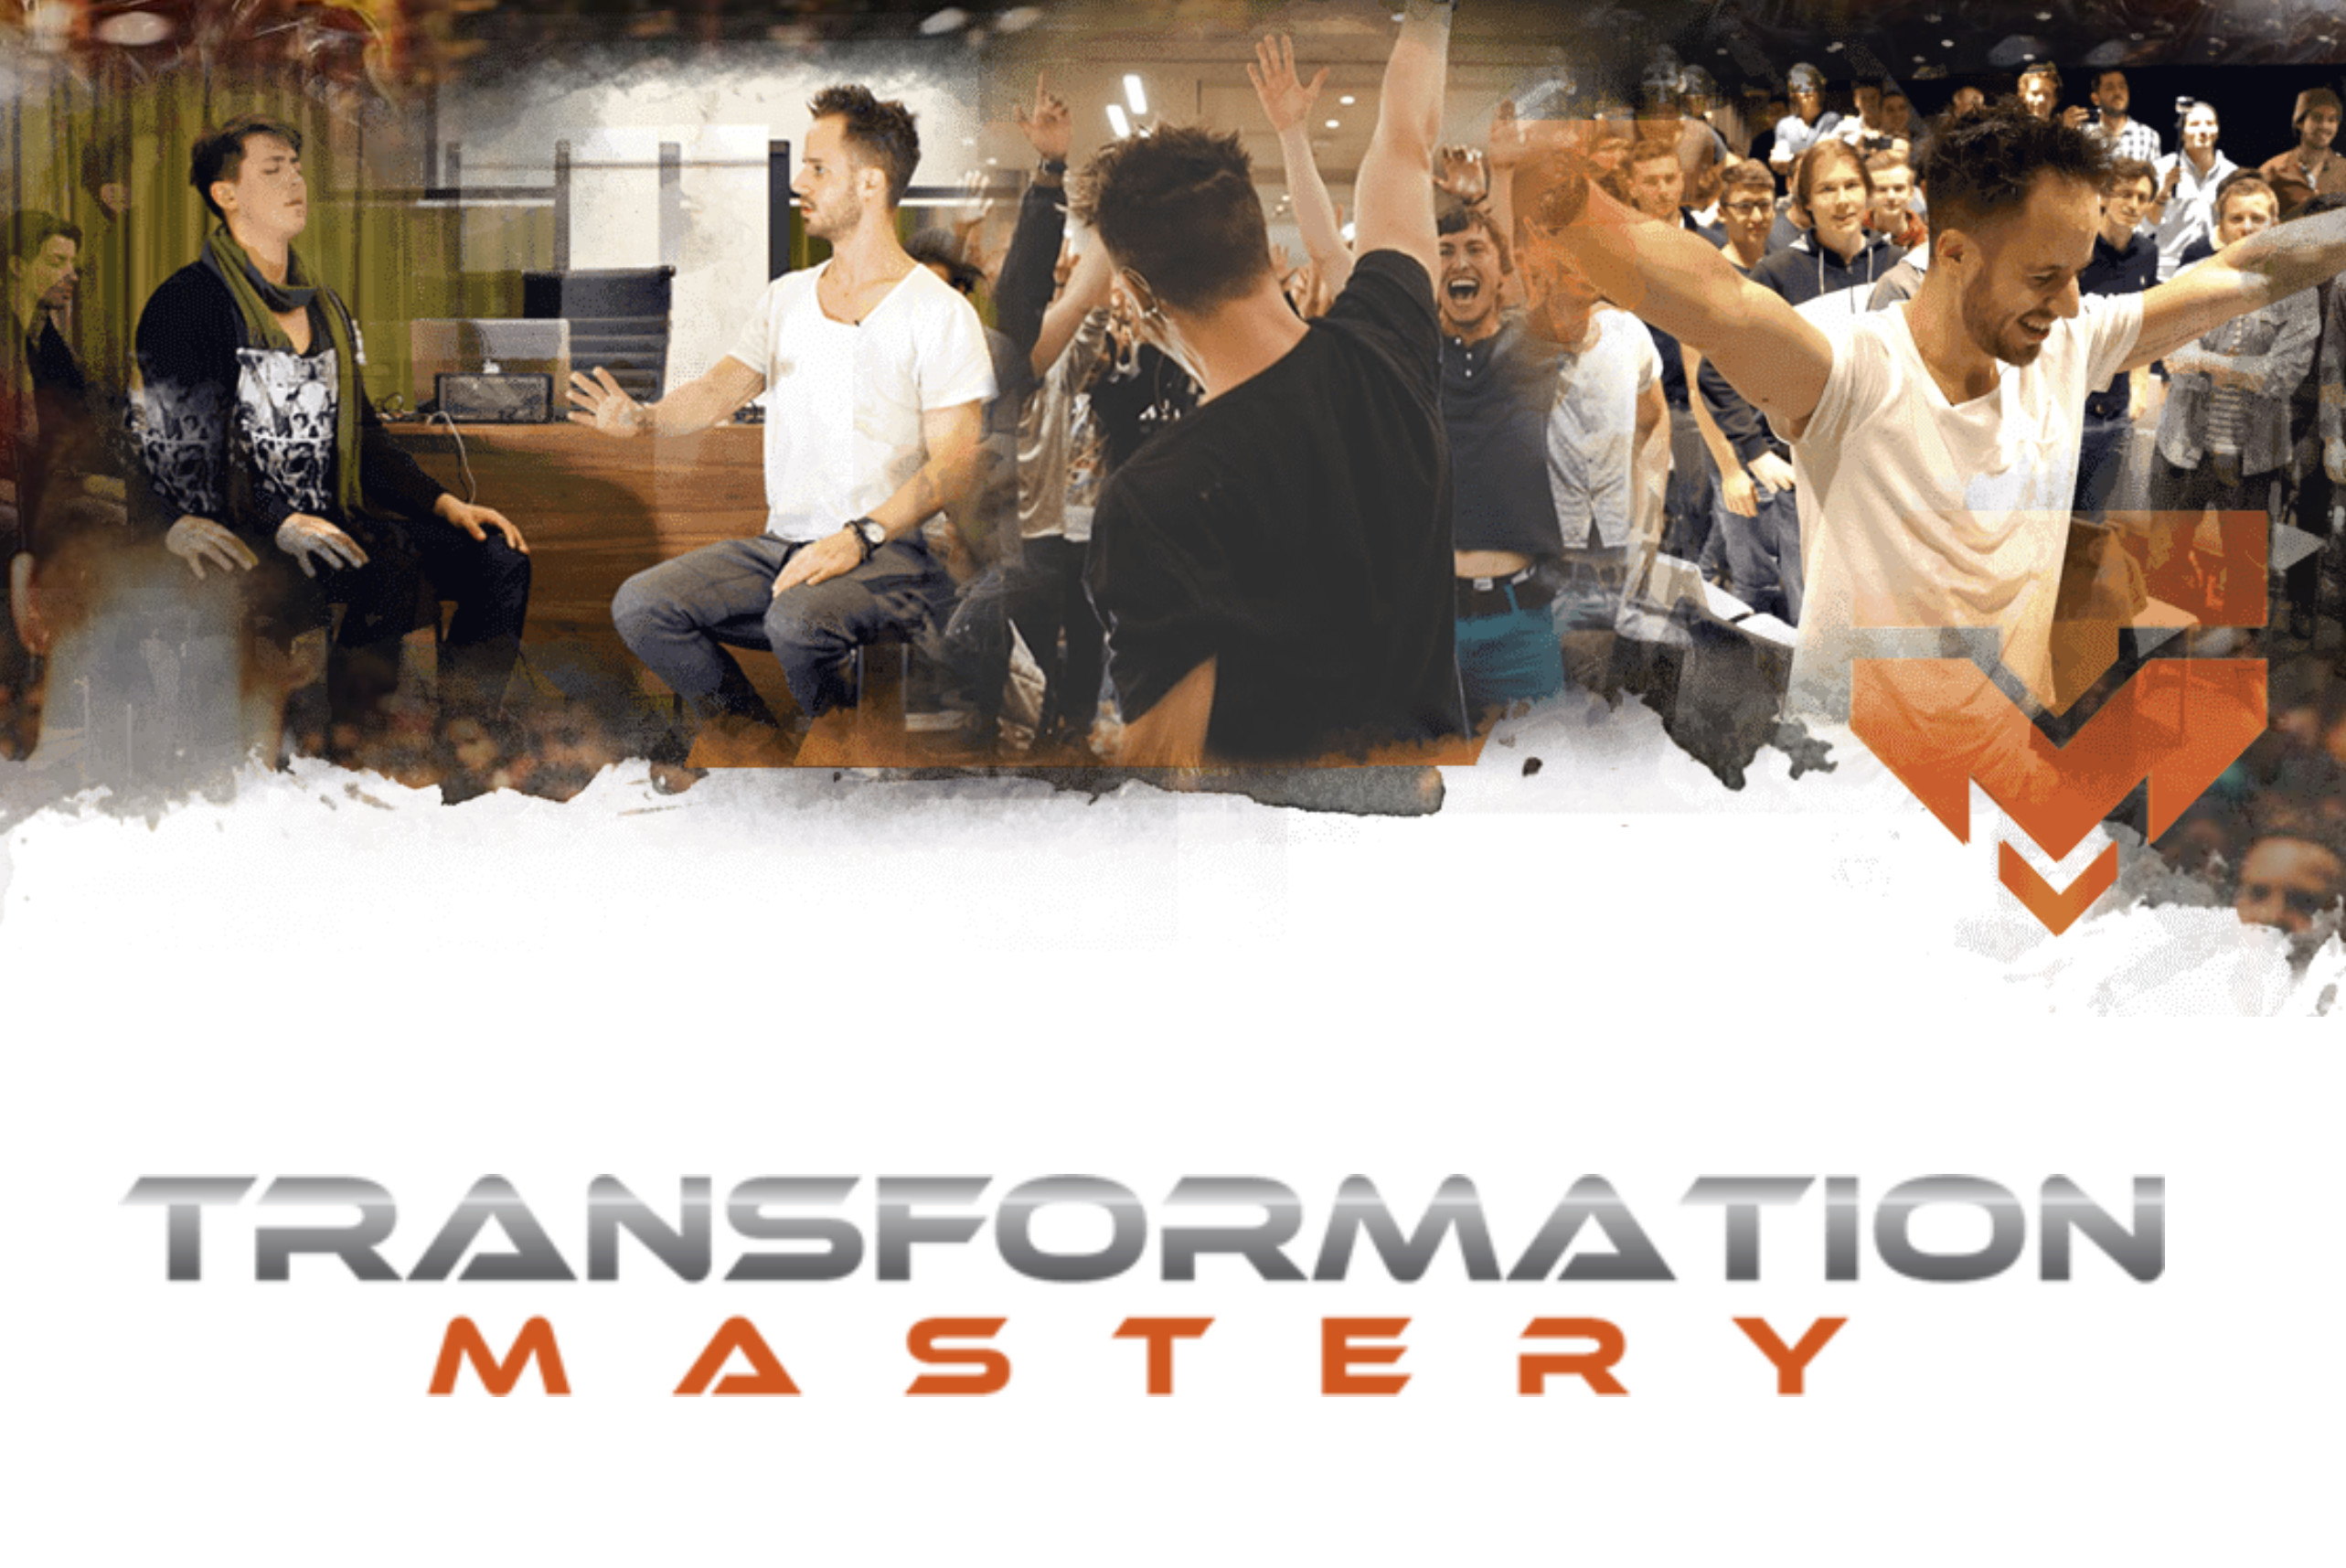 What Is Transformation Mastery